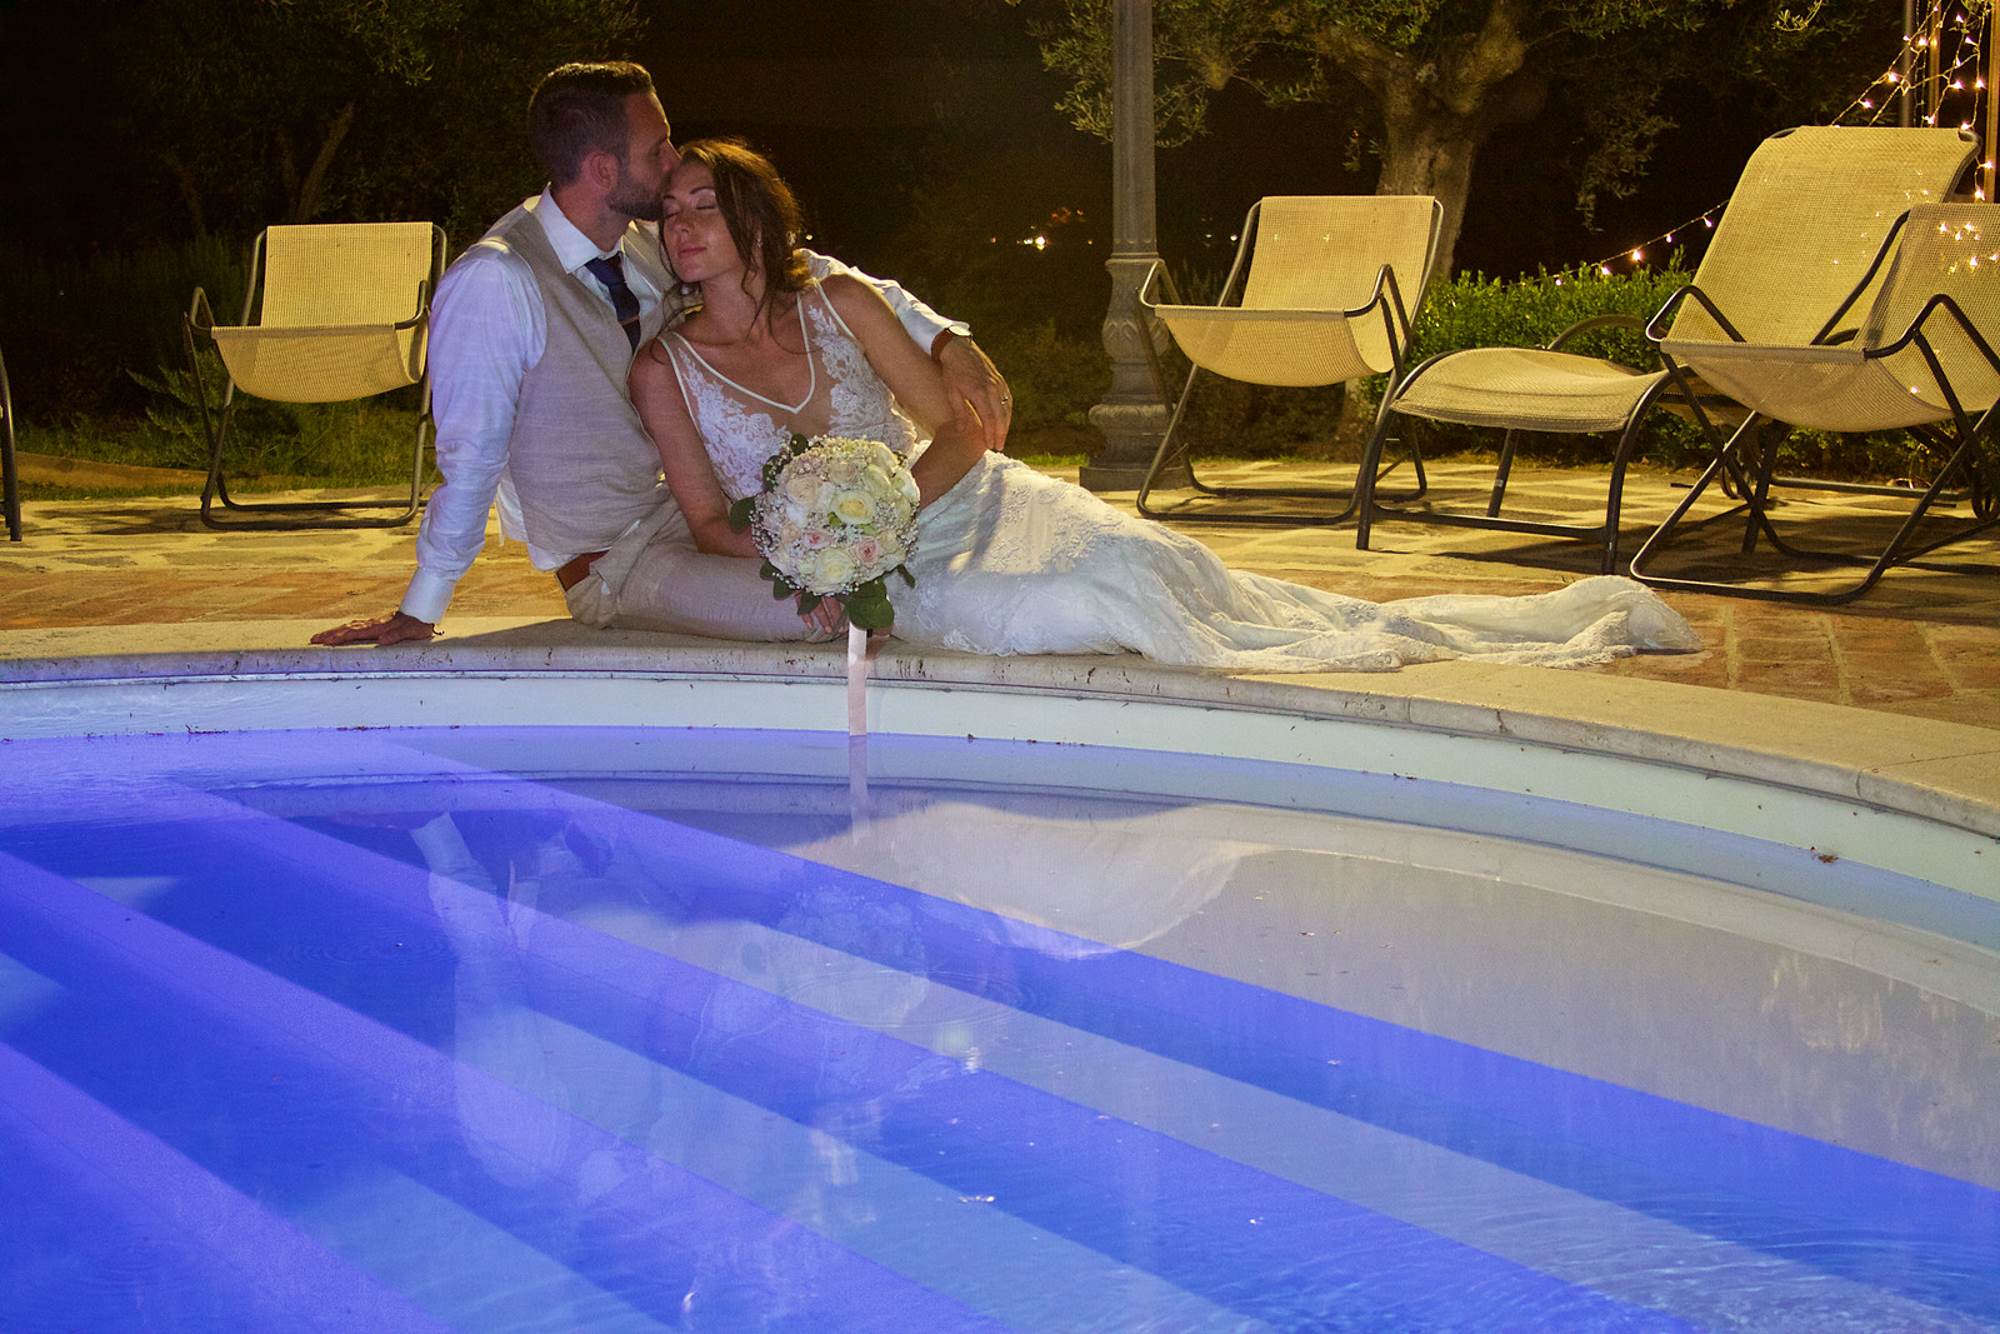 Pool Wedding Ideas in our pool. Receptions and ceremonies pool side.